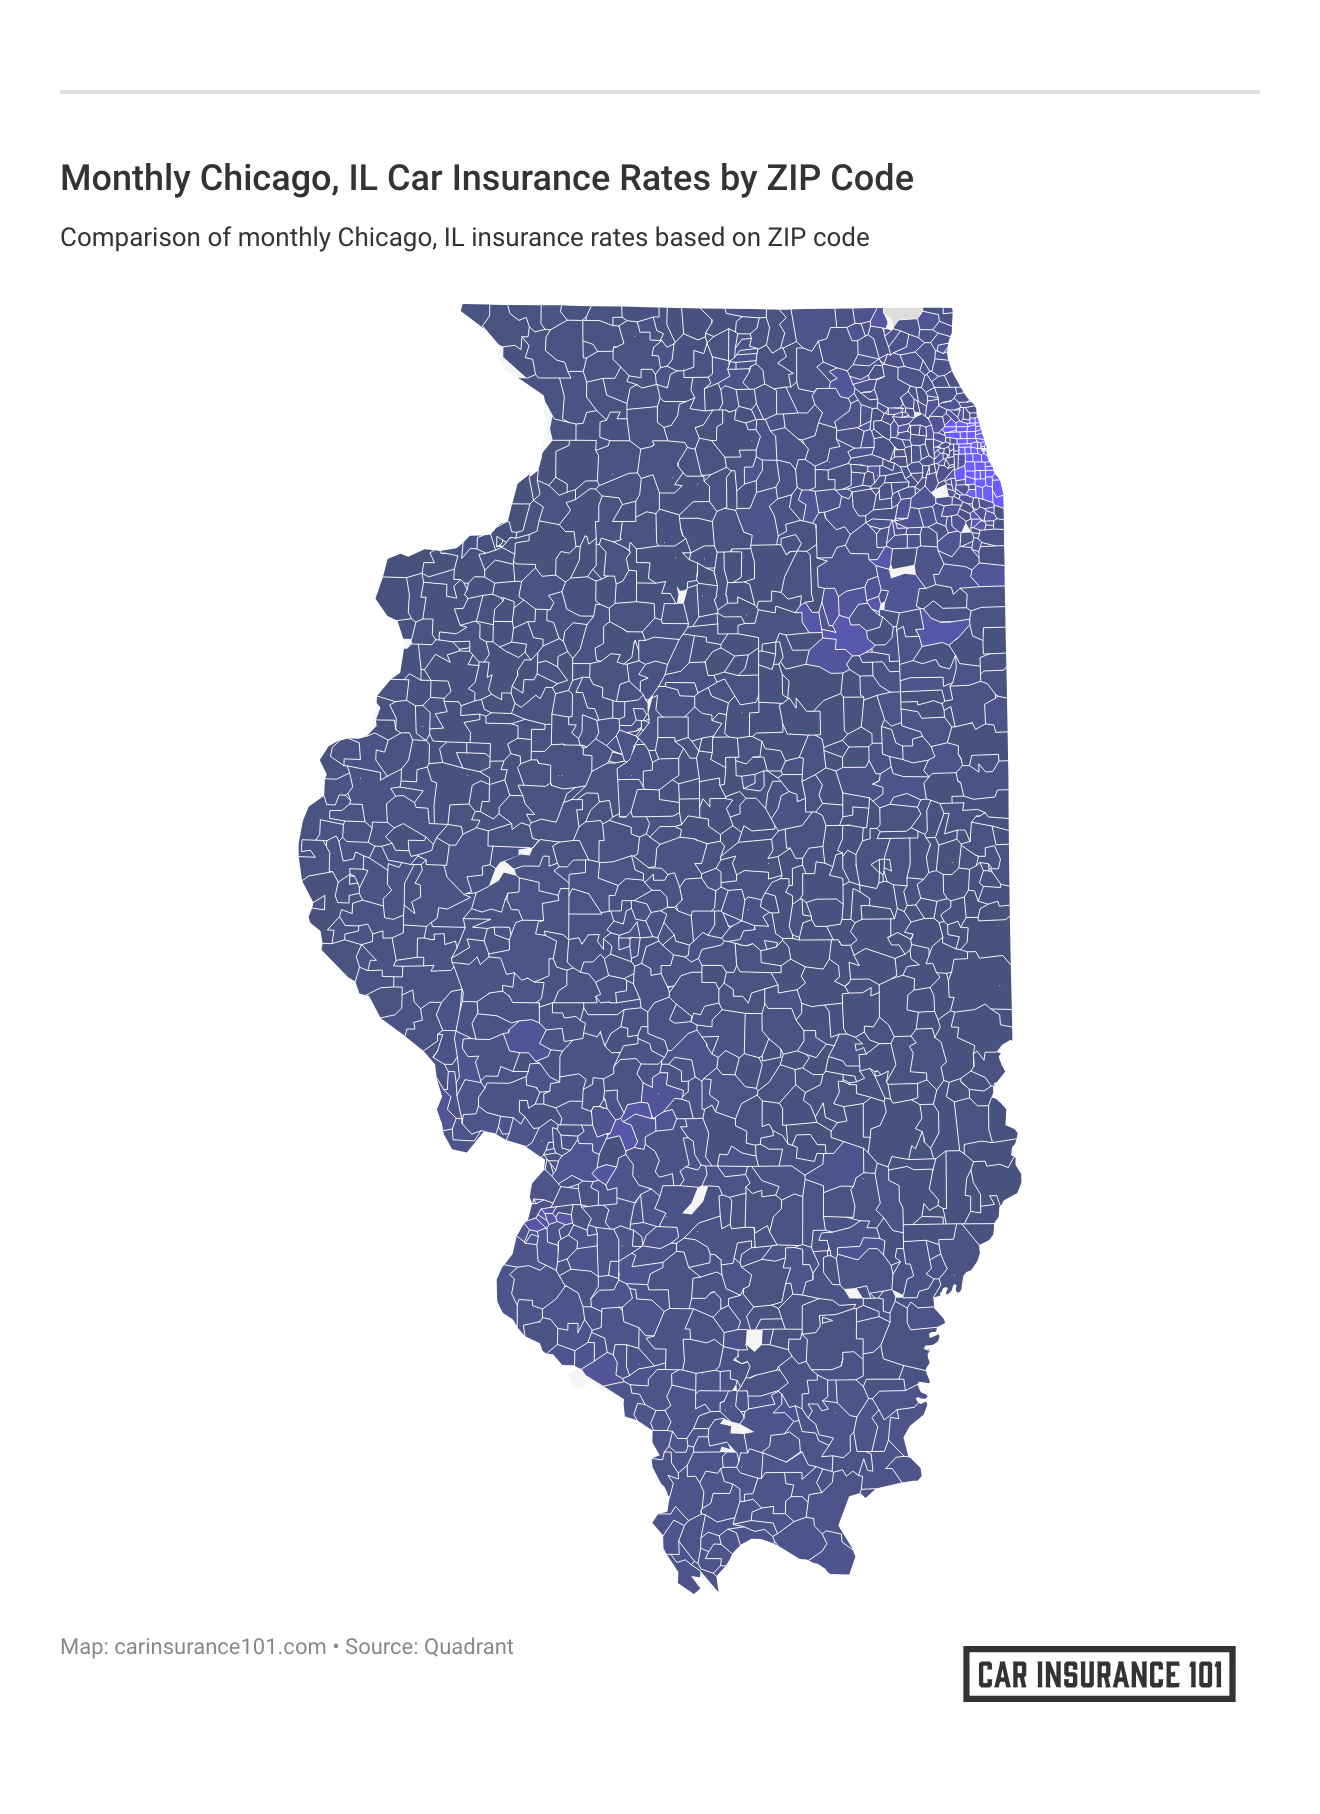 <h3>Monthly Chicago, IL Car Insurance Rates by ZIP Code</h3>